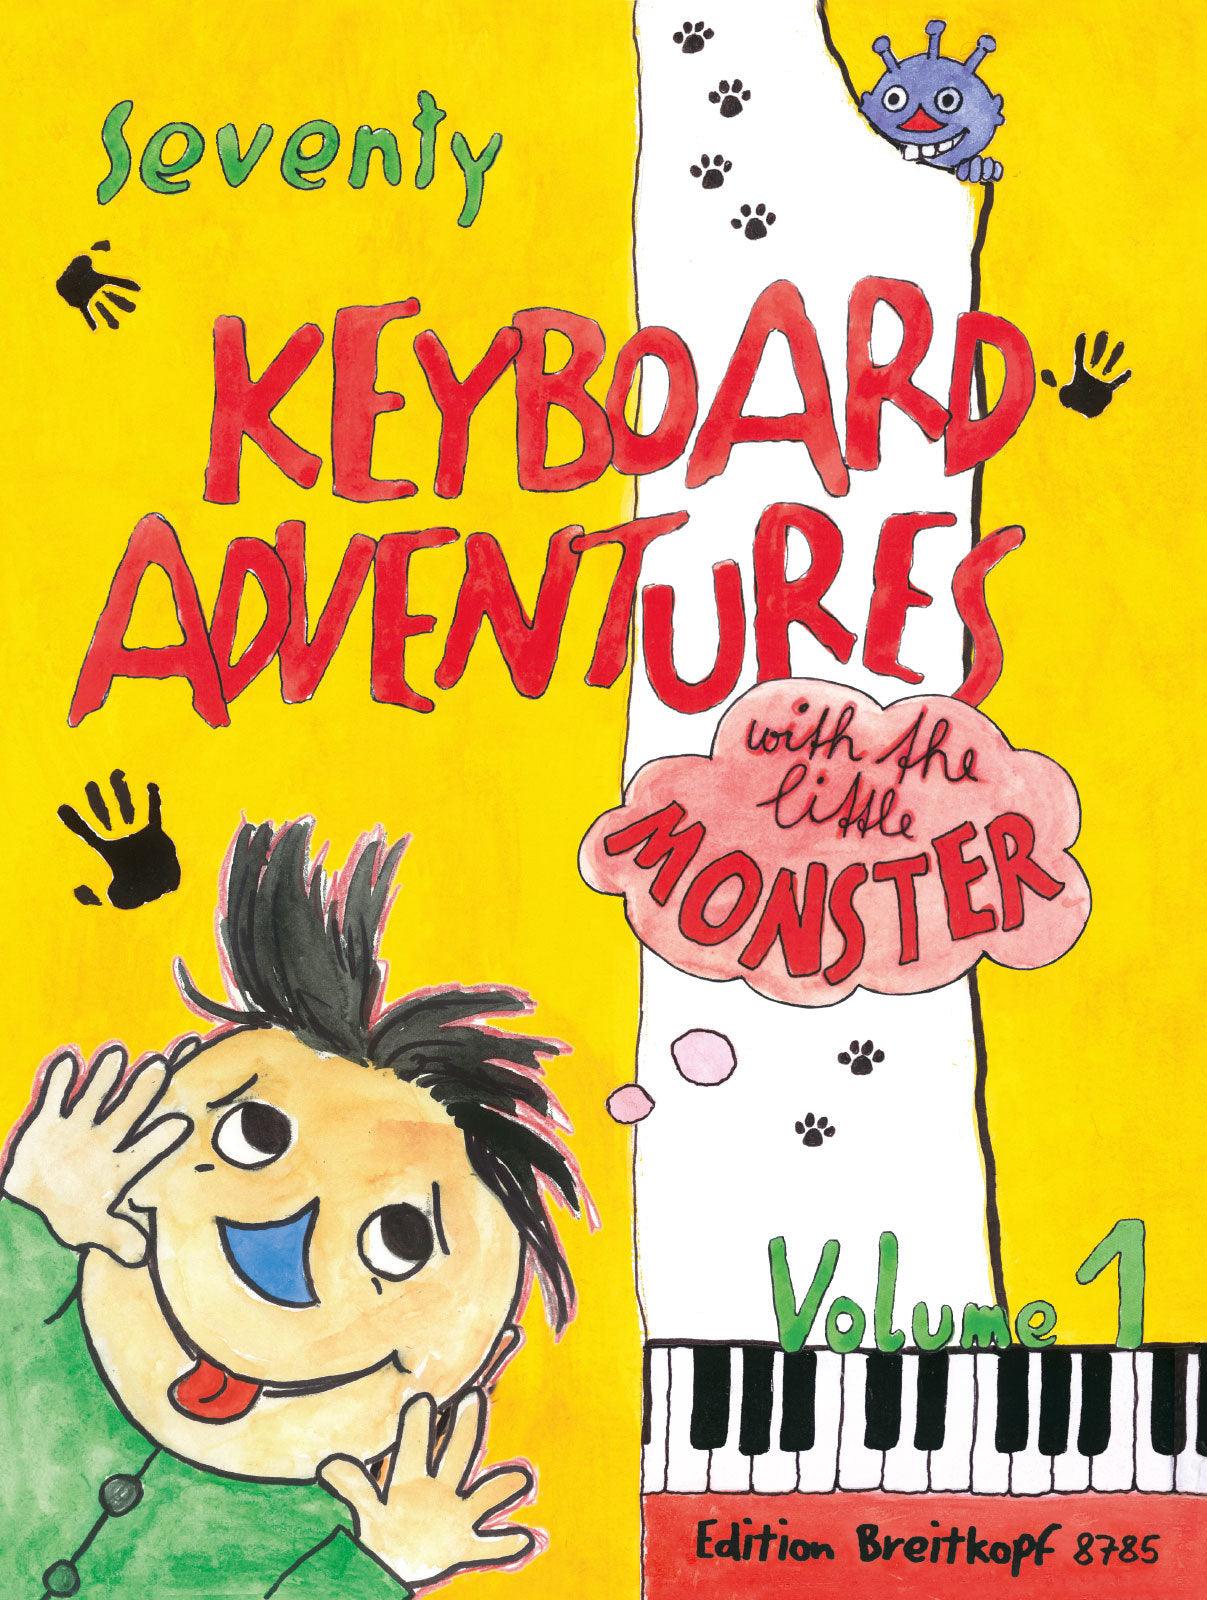 70 Keyboard Adventures with the Little Monster - Volume 1